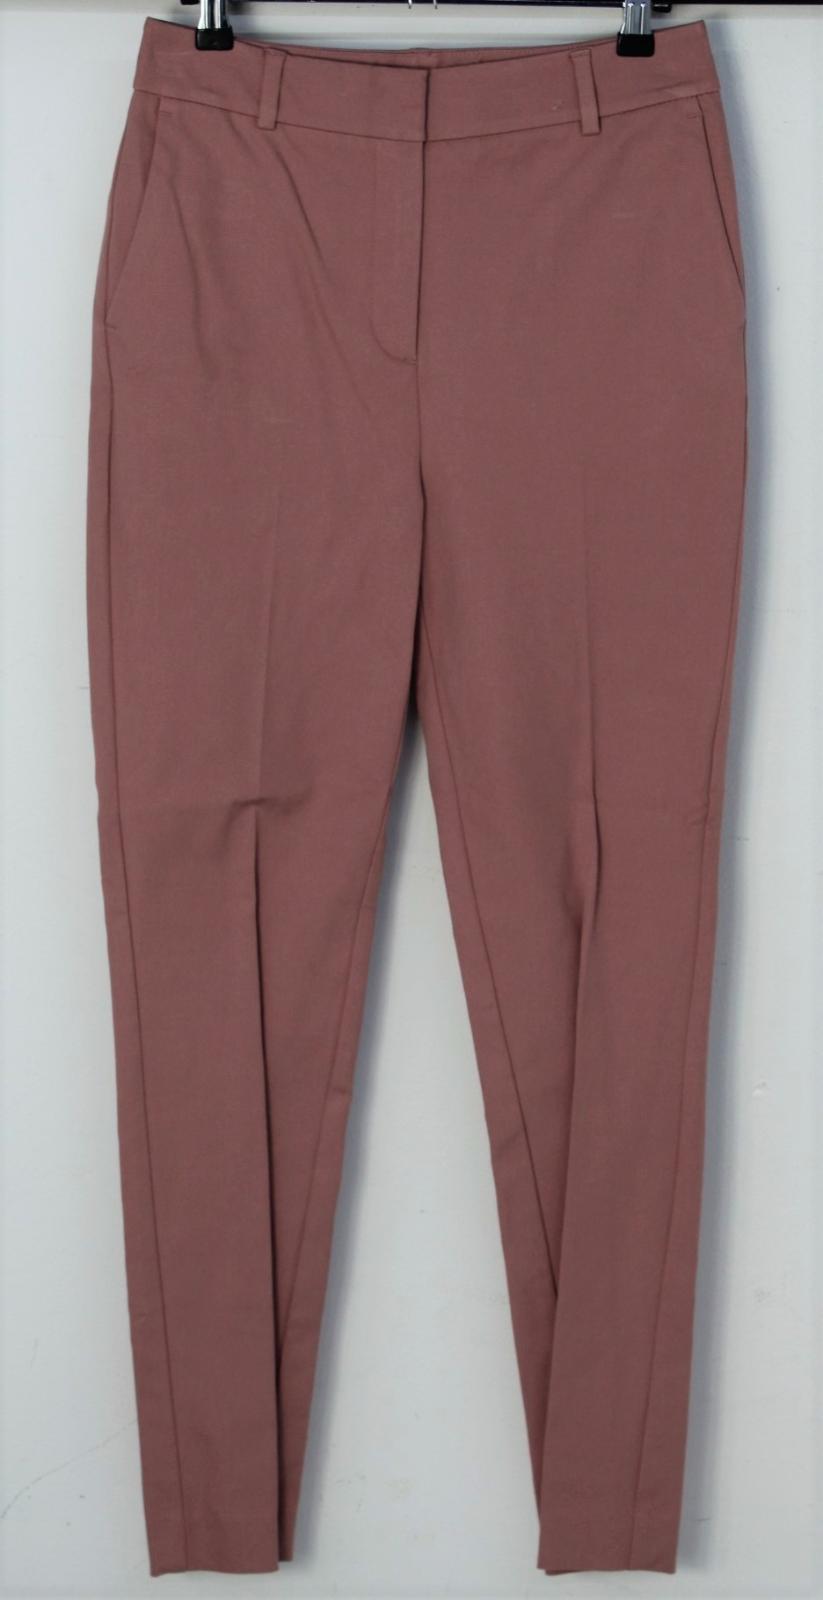 M&S Marks & Spencer Ladies Dusky Rose Cotton Skinny Trousers UK12 RRP45 NEW